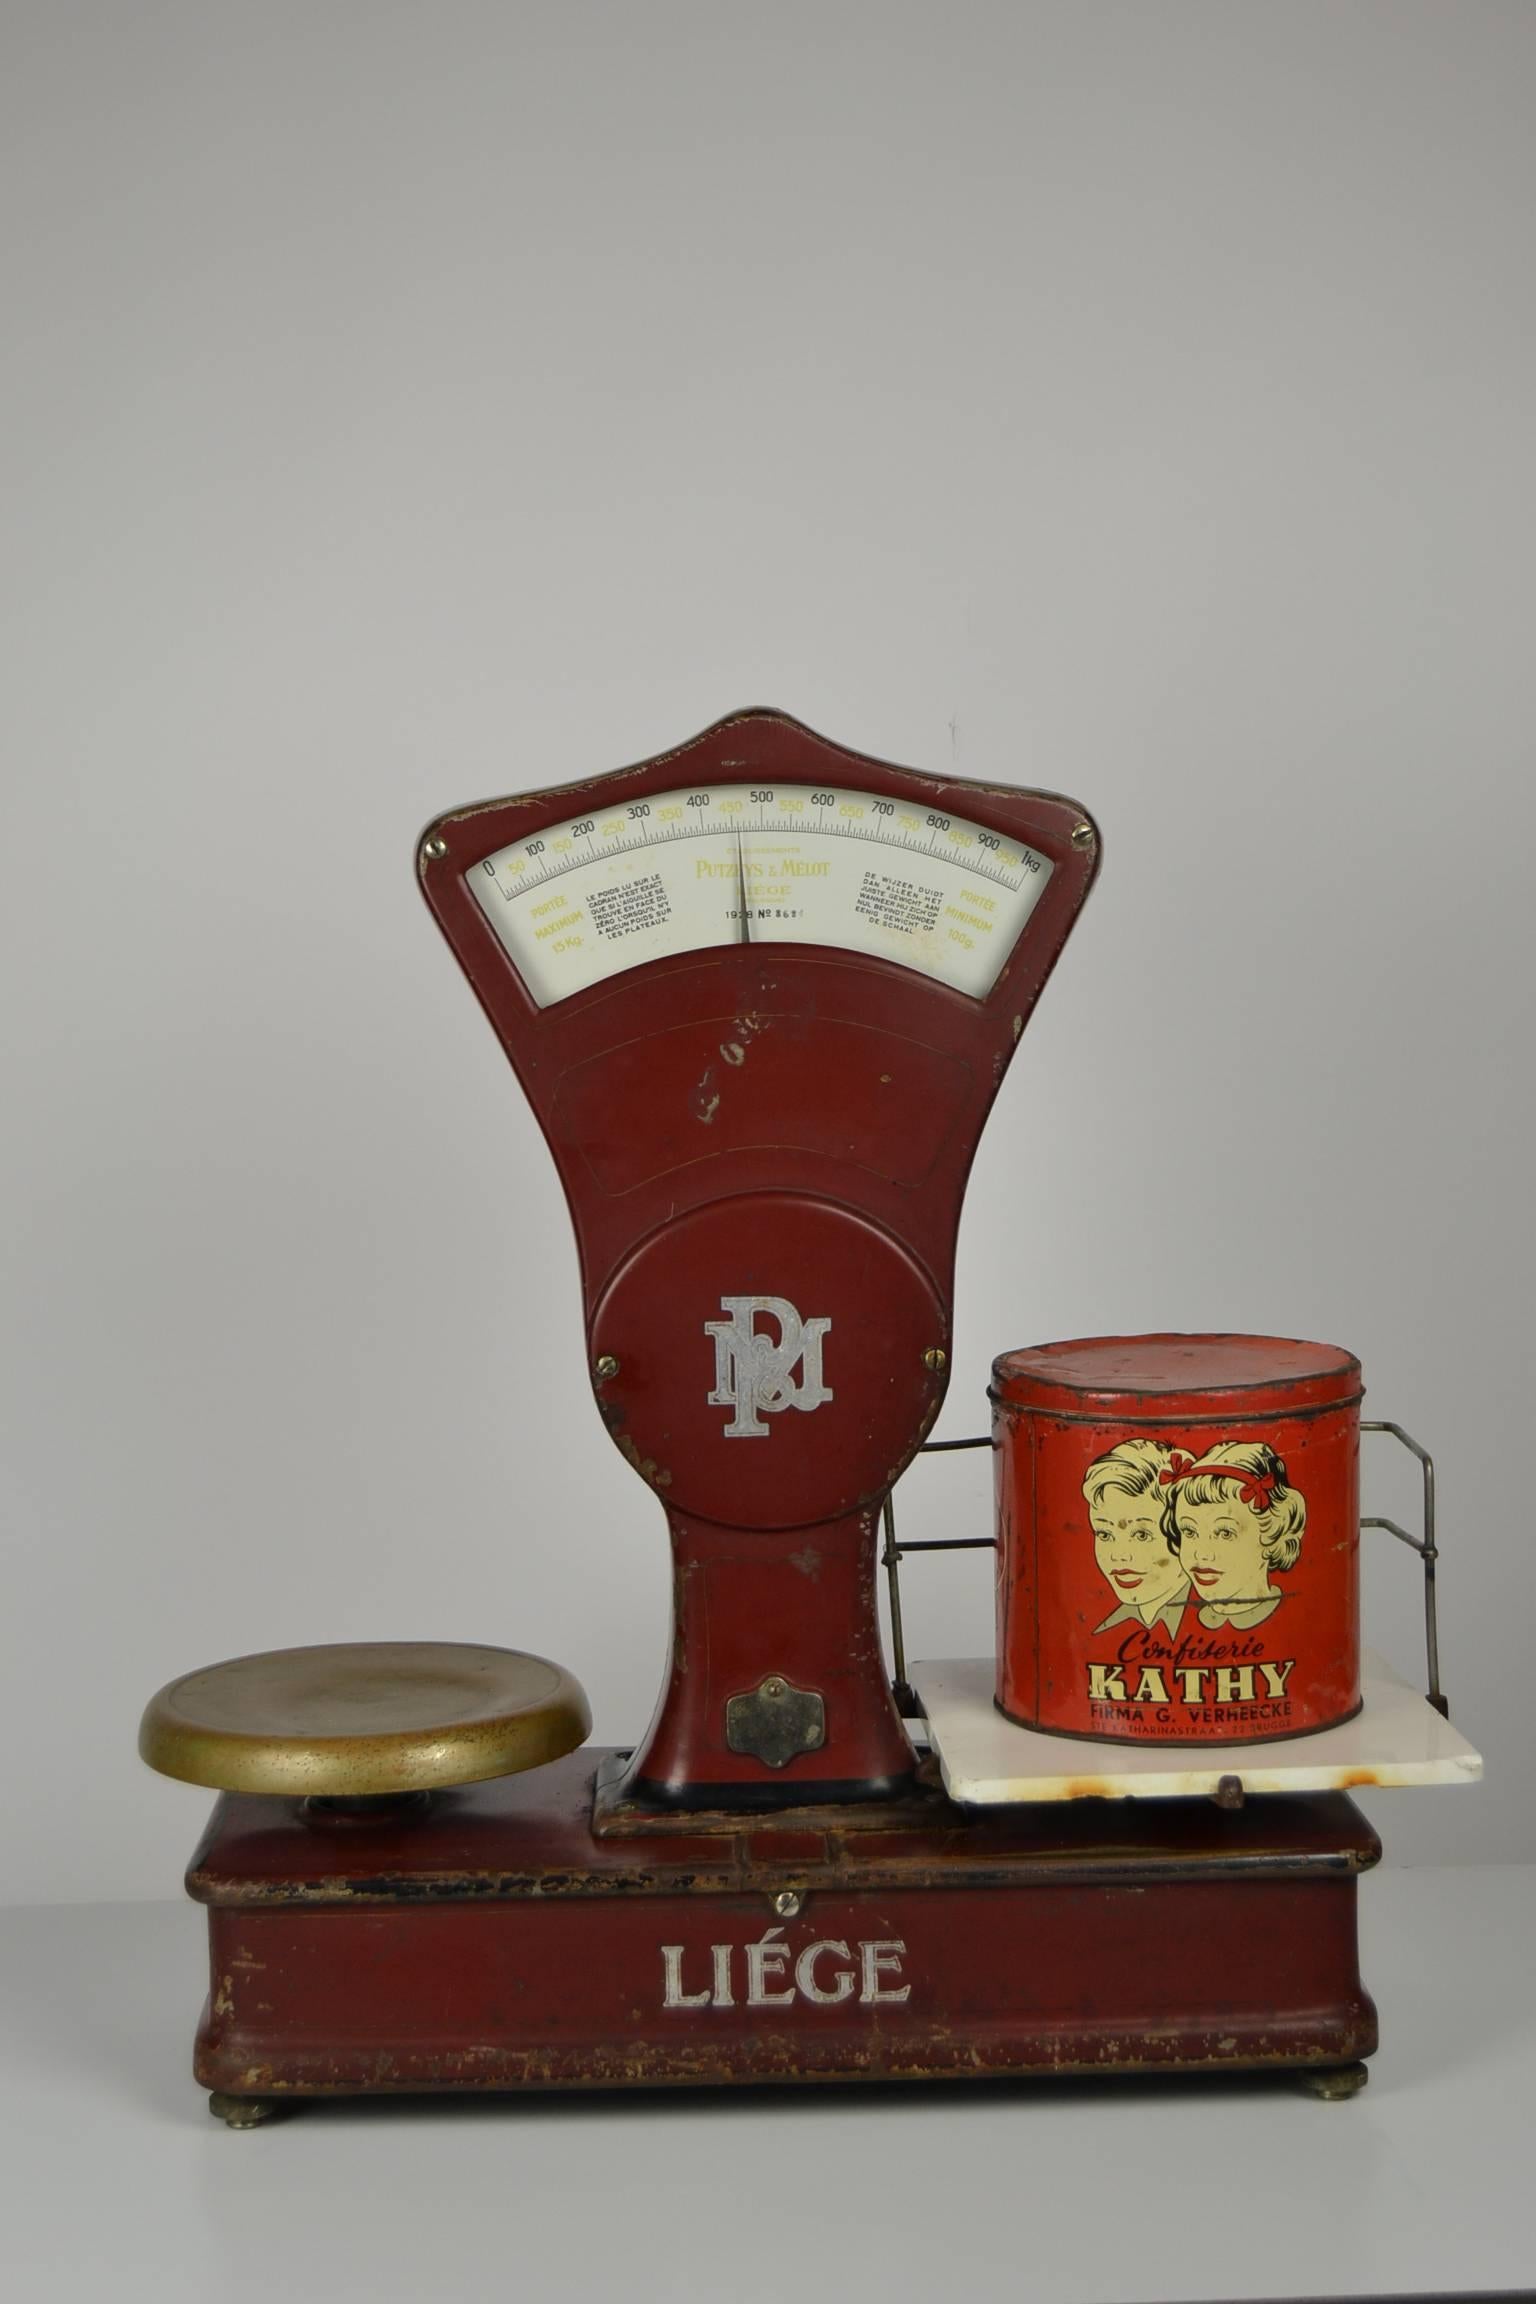 vintage grocery scale